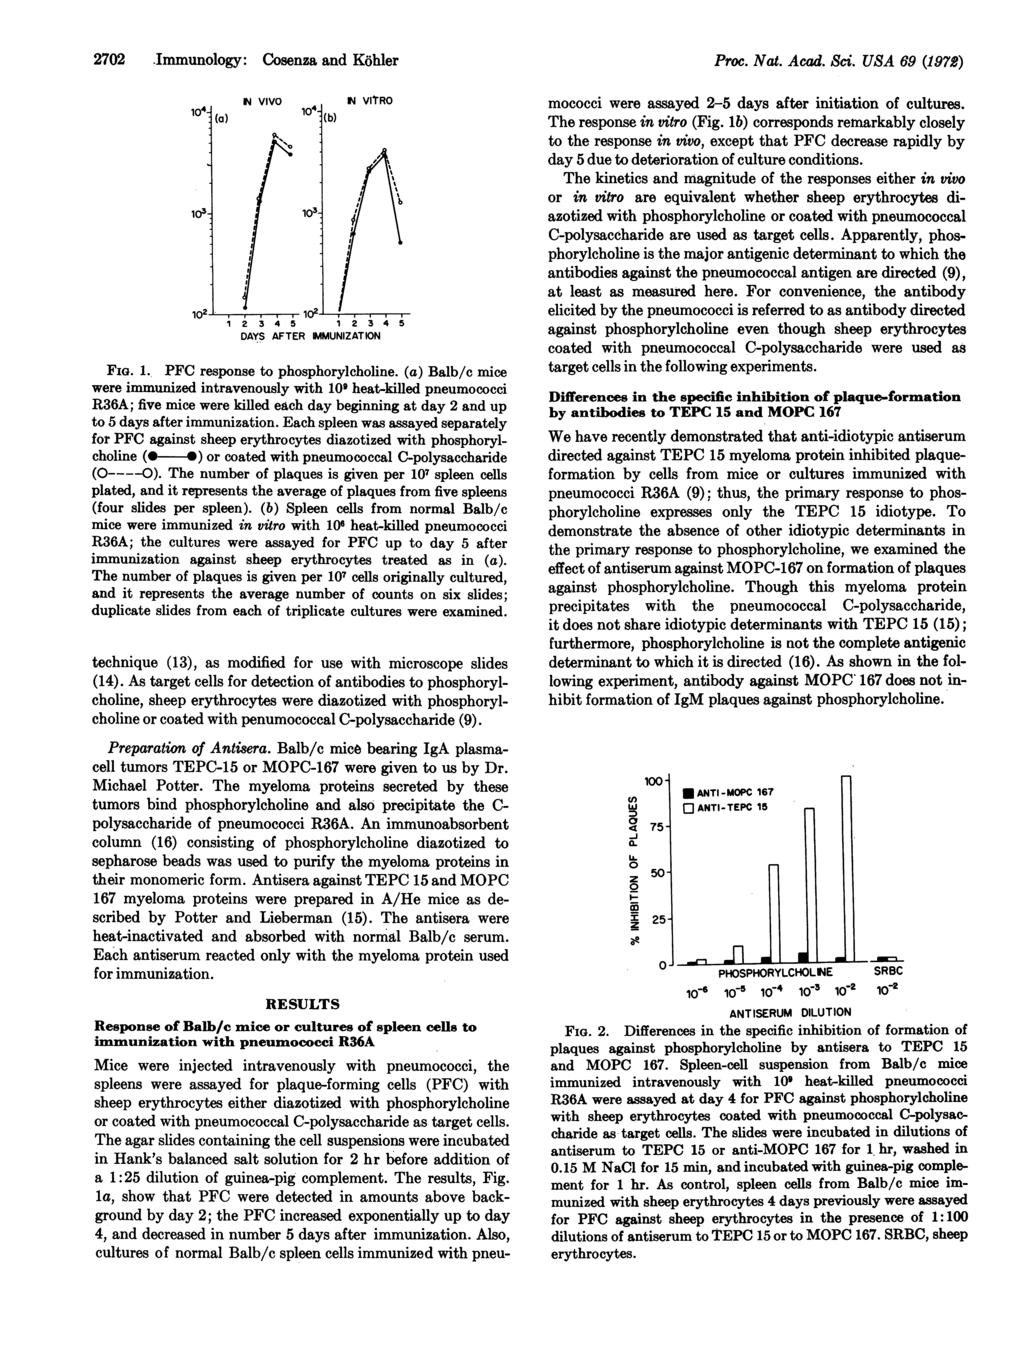 2702 -Immunology: Cosenza and Kohier IN VIVO IN VITRO 1 2 3 4 5 1 2 3 4 DAYS AFTER IMMUNIZATION FIG. 1. PFC response to phosphorylcholine.